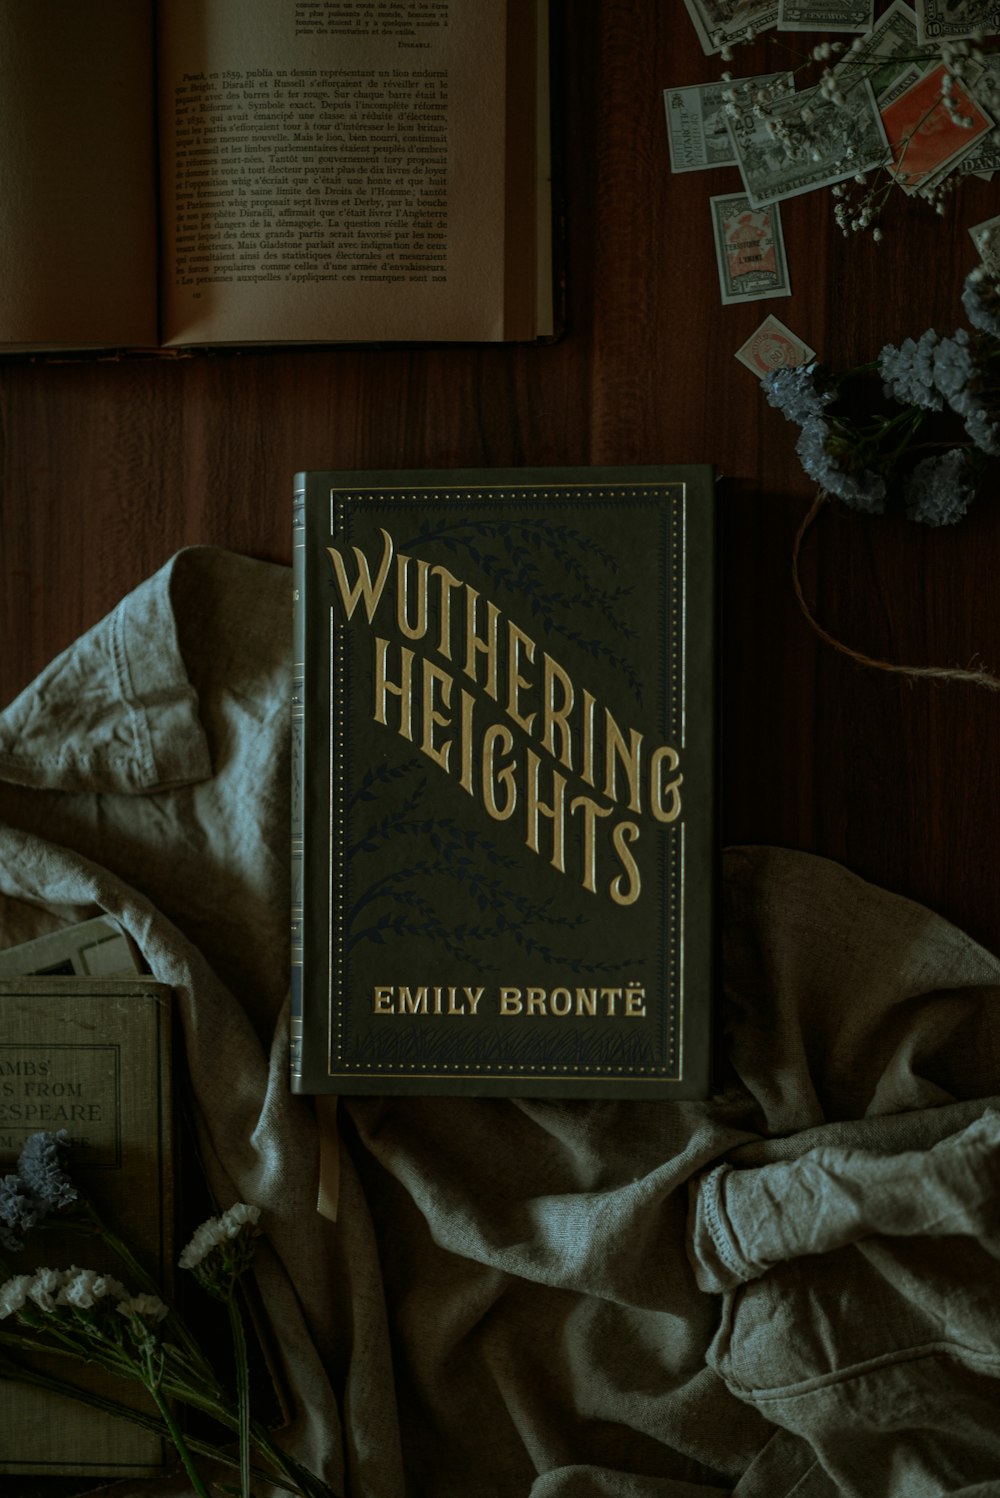 A copy of Wuthering Heights by Emily Bronte